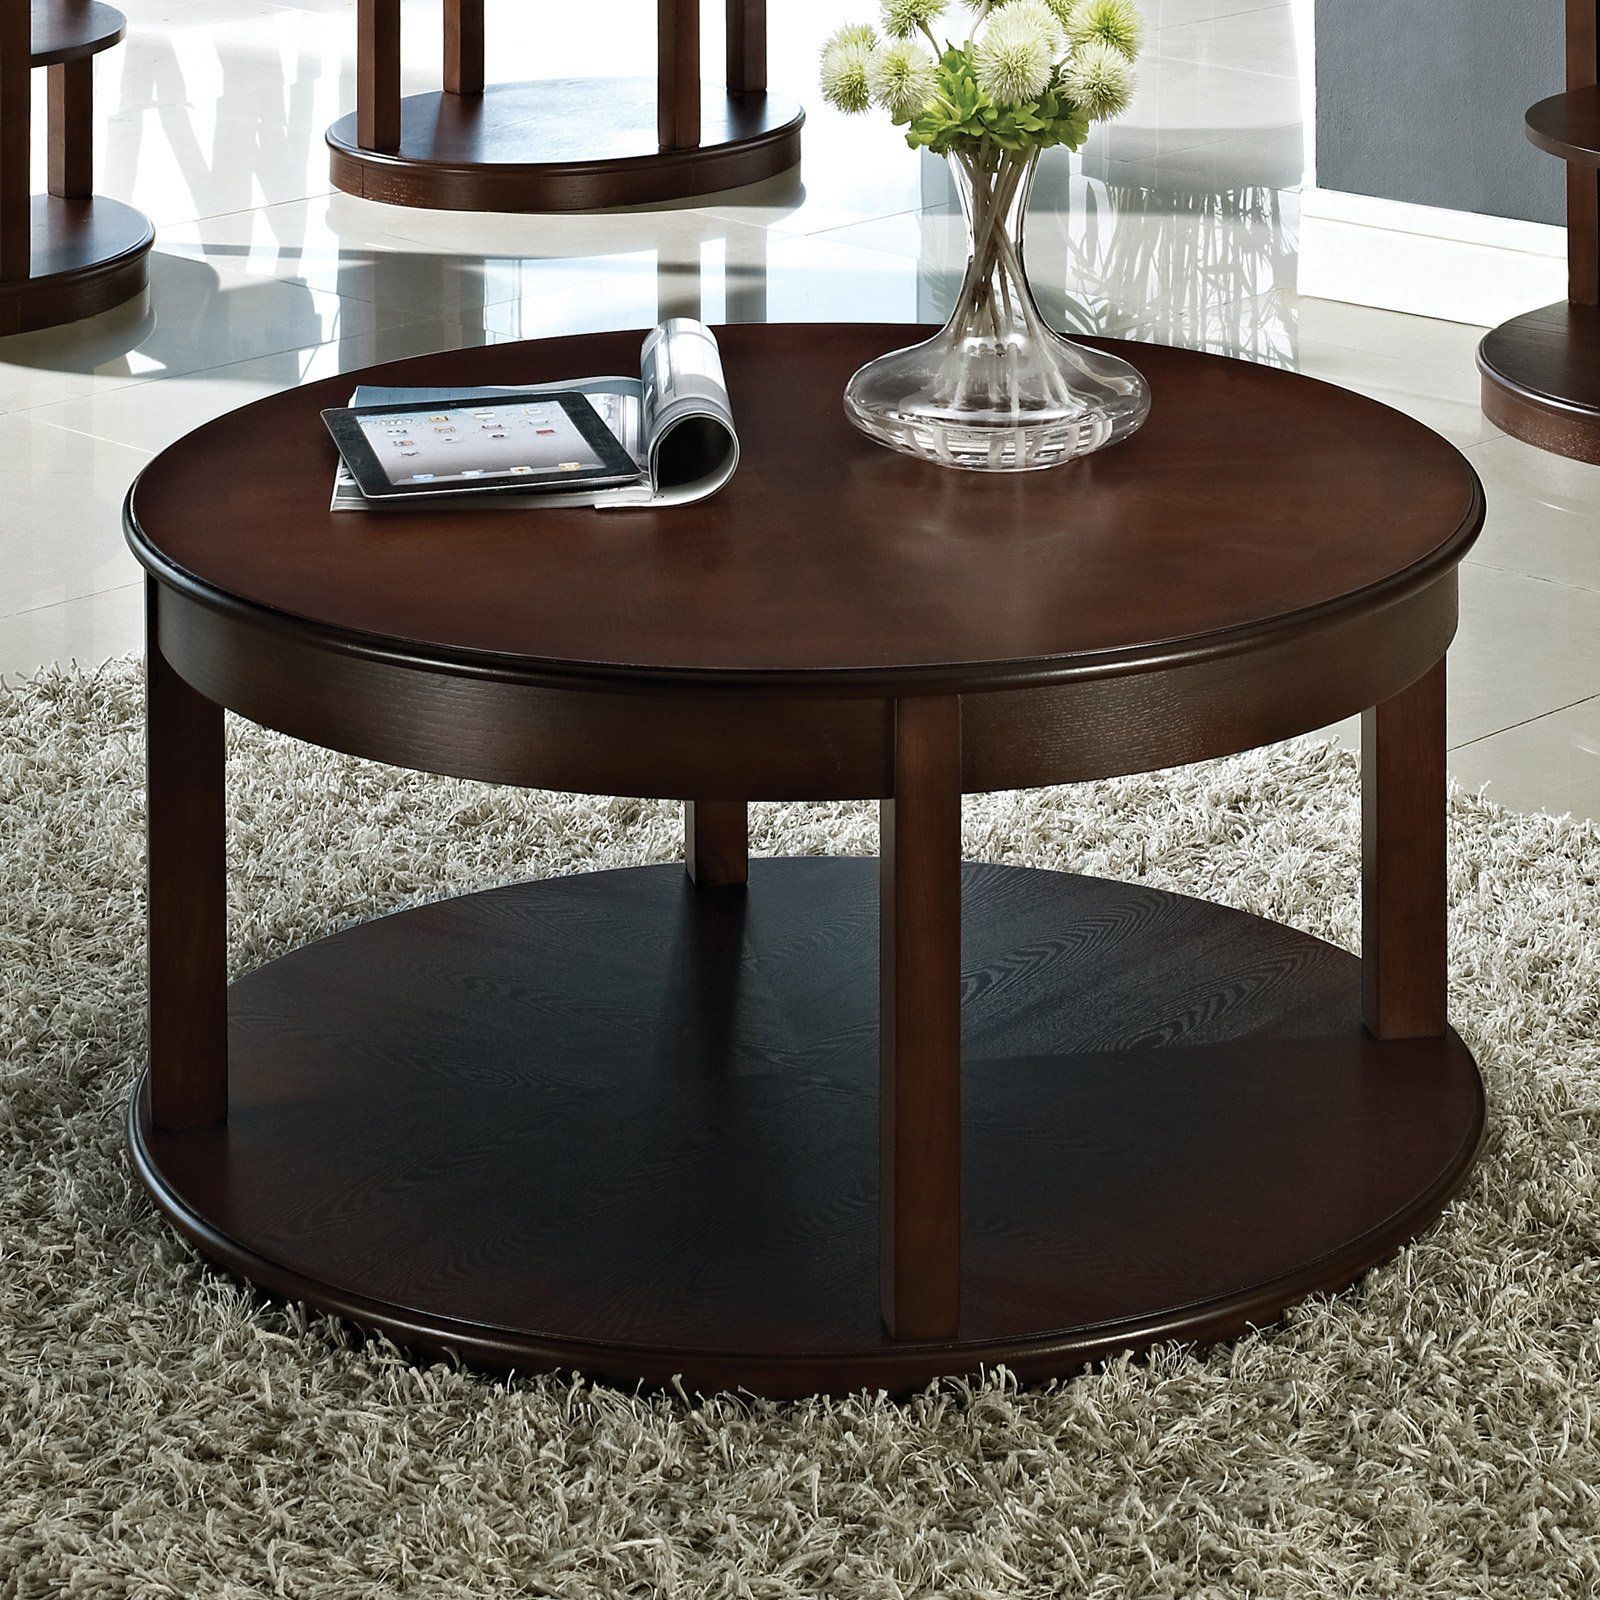 Have To Have It. Steve Silver Crestview Round Espresso Wood Spinning Inside Espresso Wood Finish Coffee Tables (Gallery 8 of 21)